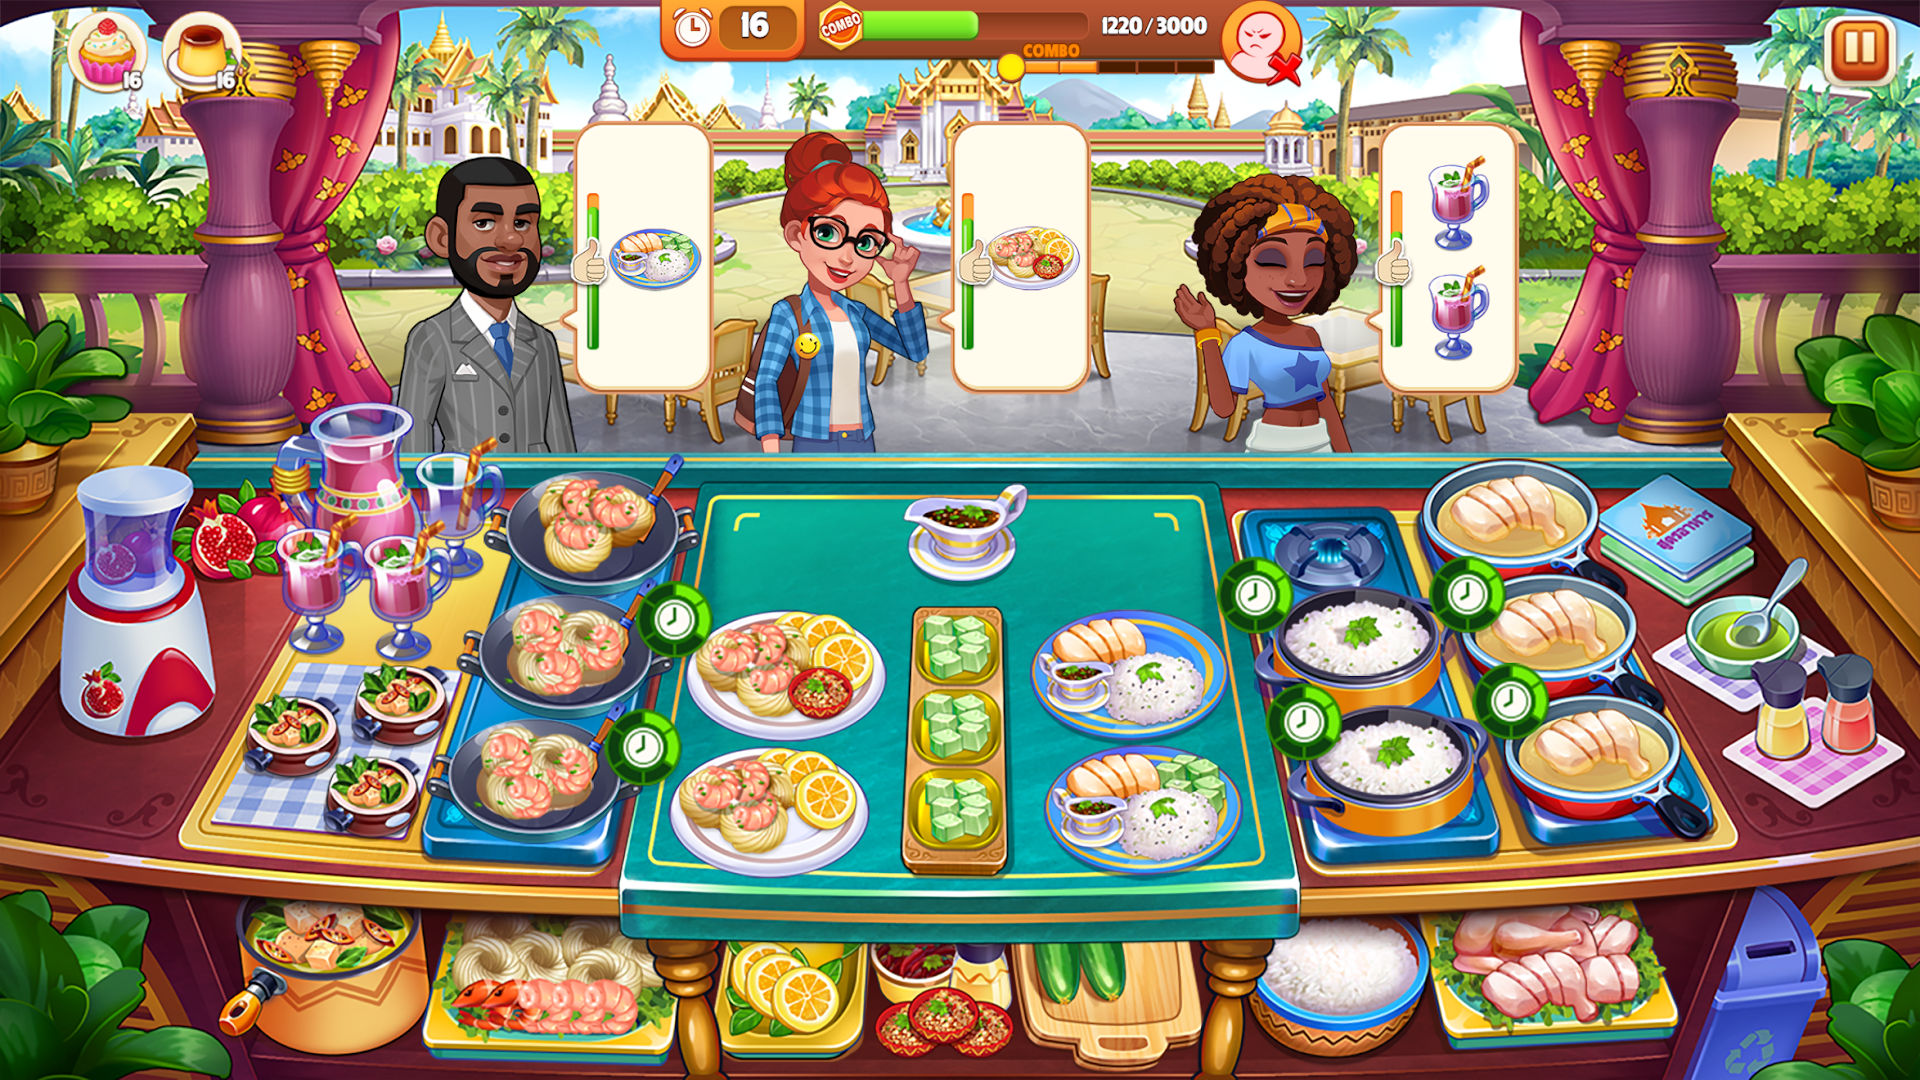 The Best Cooking Games of 2023: A Culinary Adventure Unveiled, Featuring  Star Chef 2